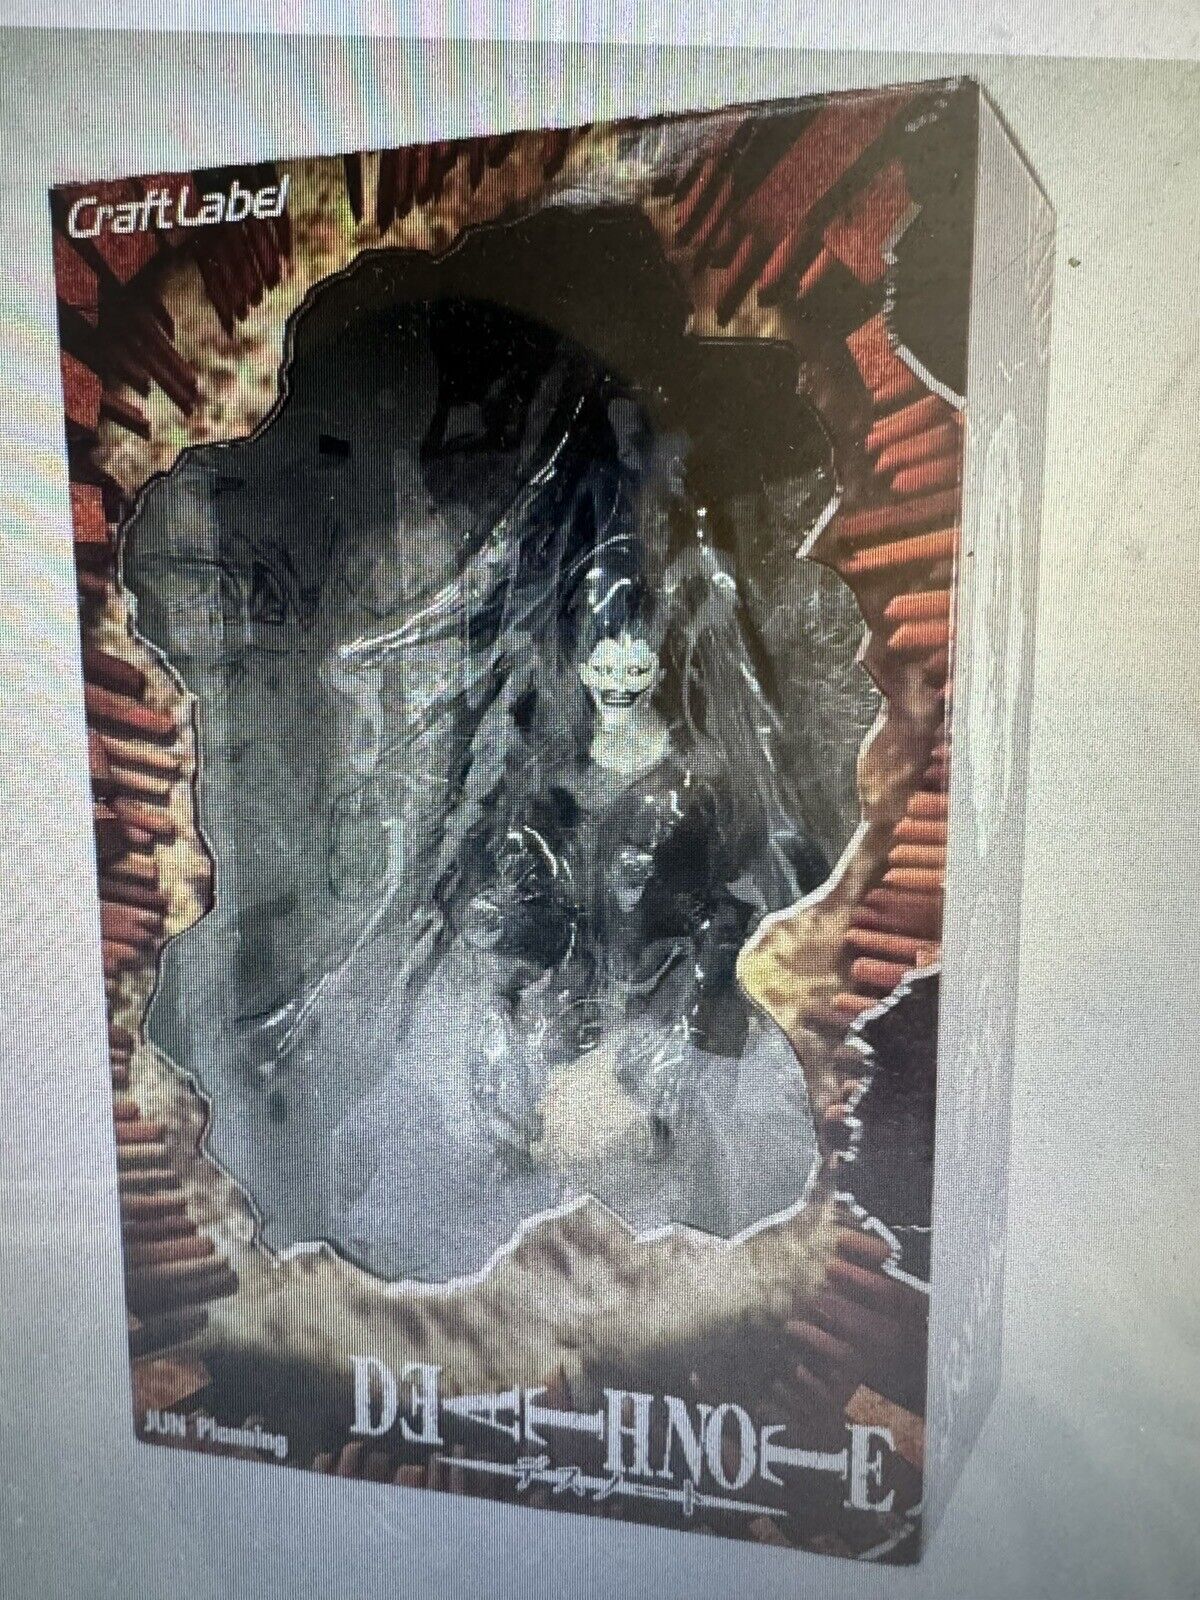 DEATH NOTE RYUK FIGURE RARE CRAFT LABEL From Japan